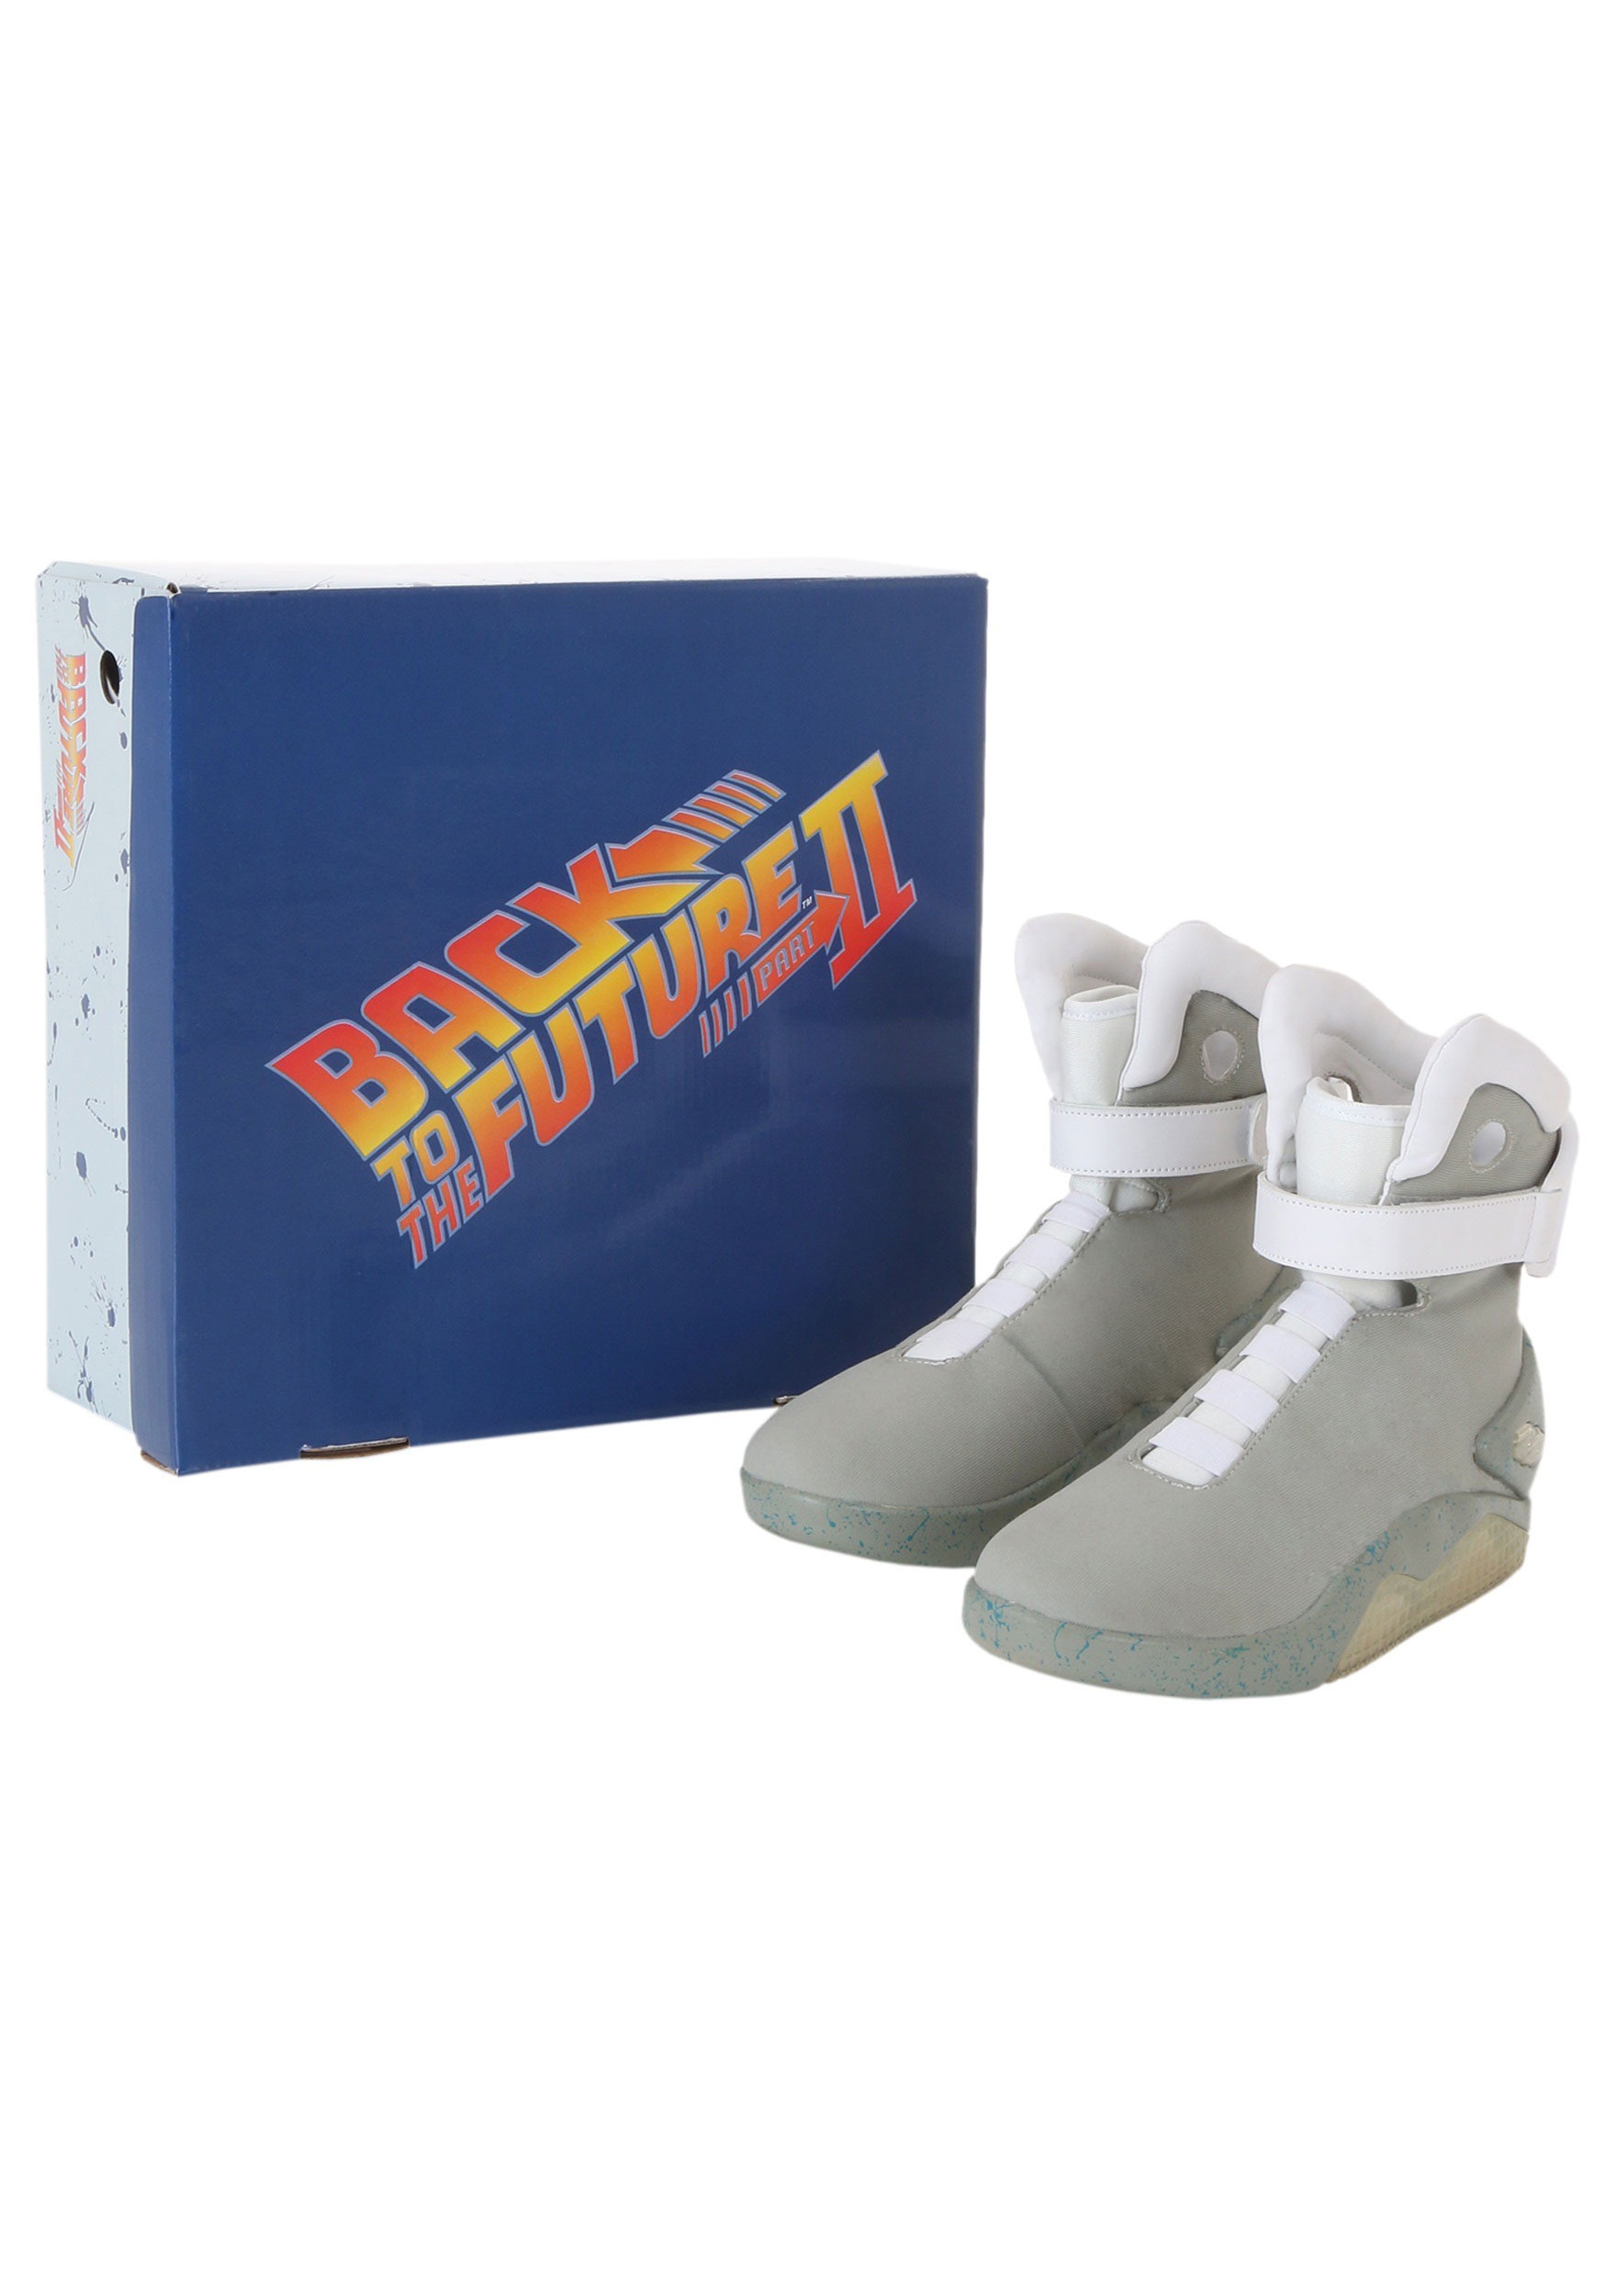 marty mcfly shoes for sale